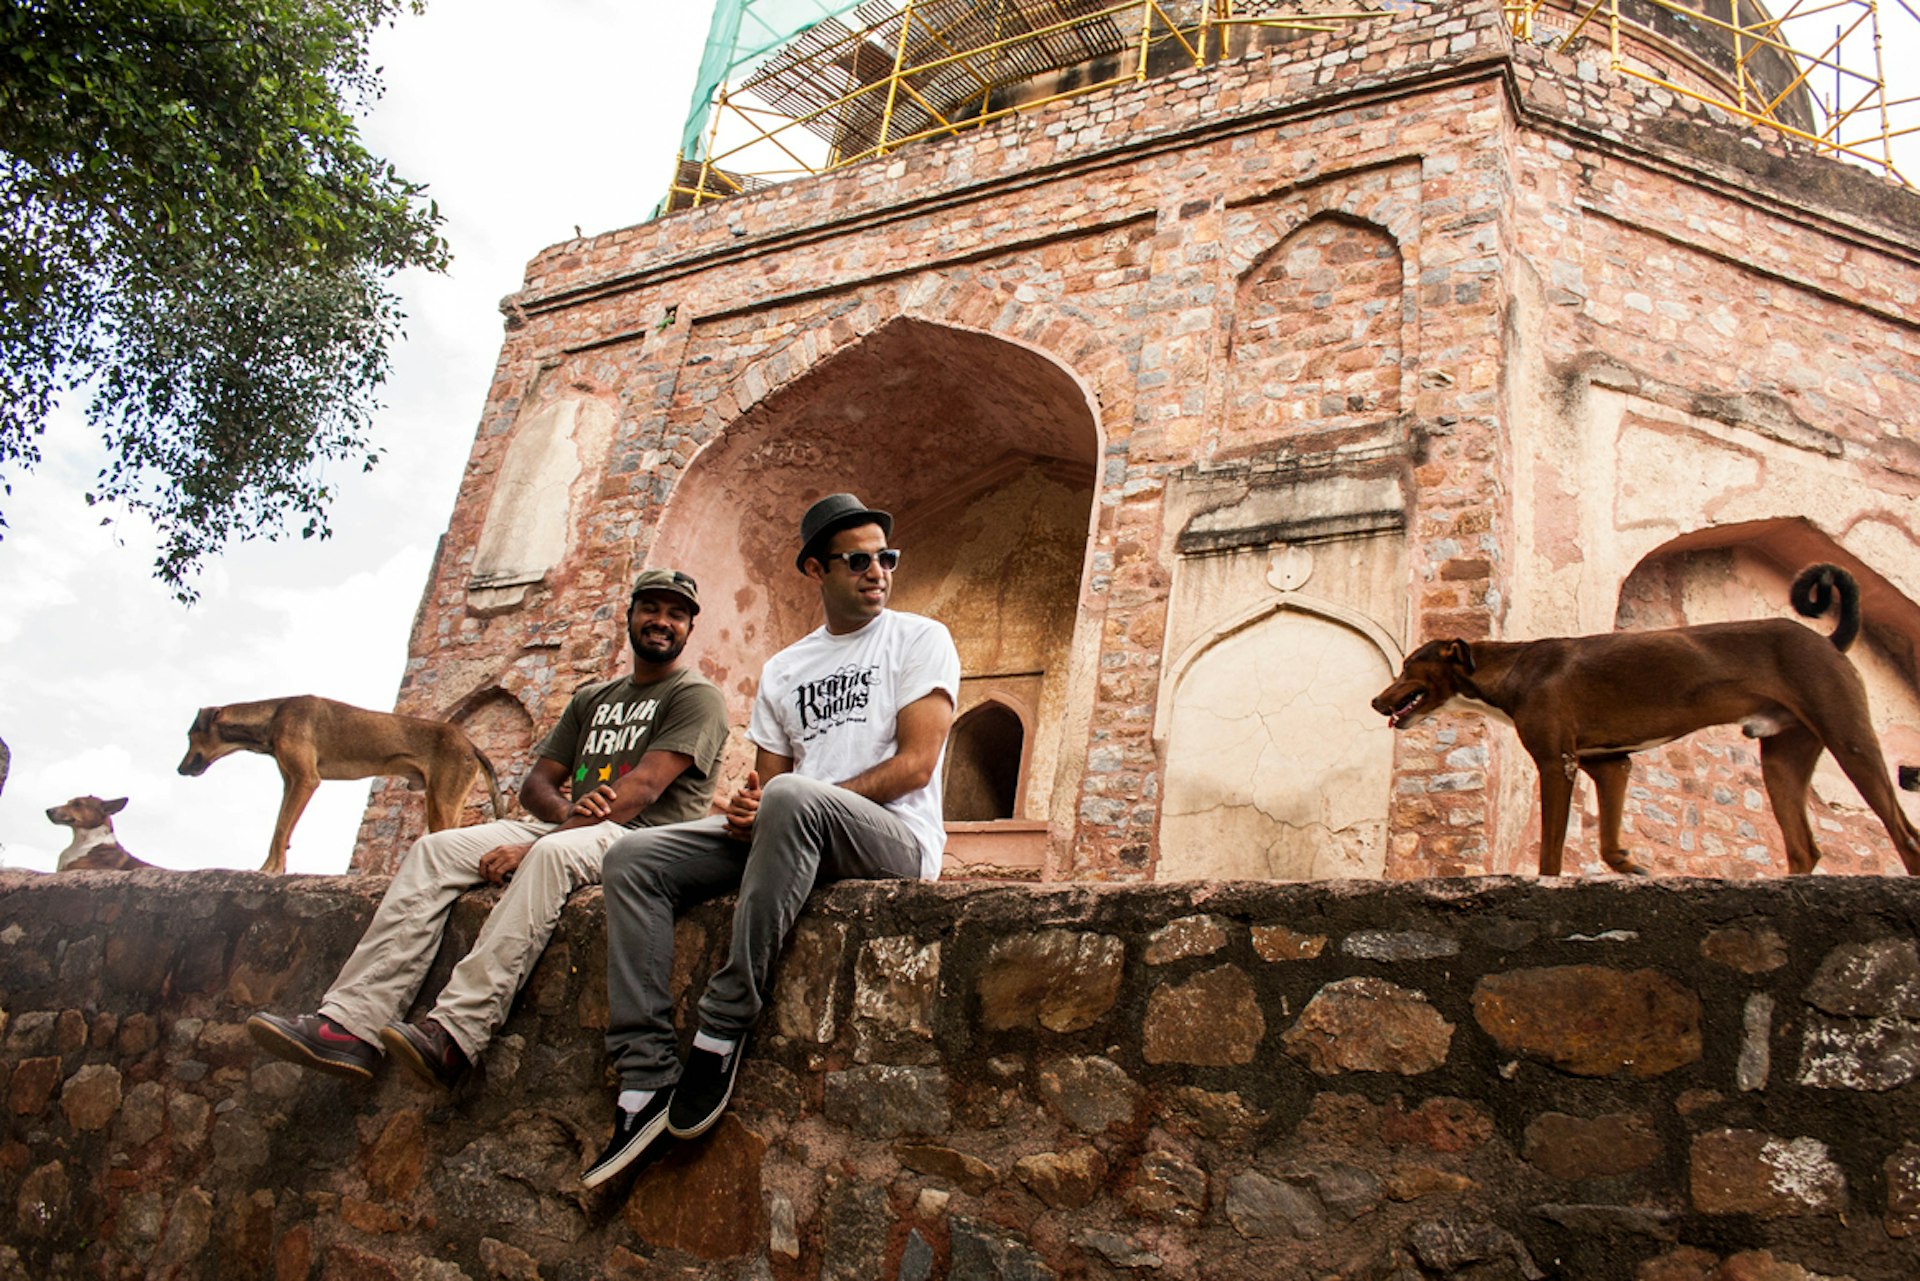 Reggae is taking root in the streets of New Delhi